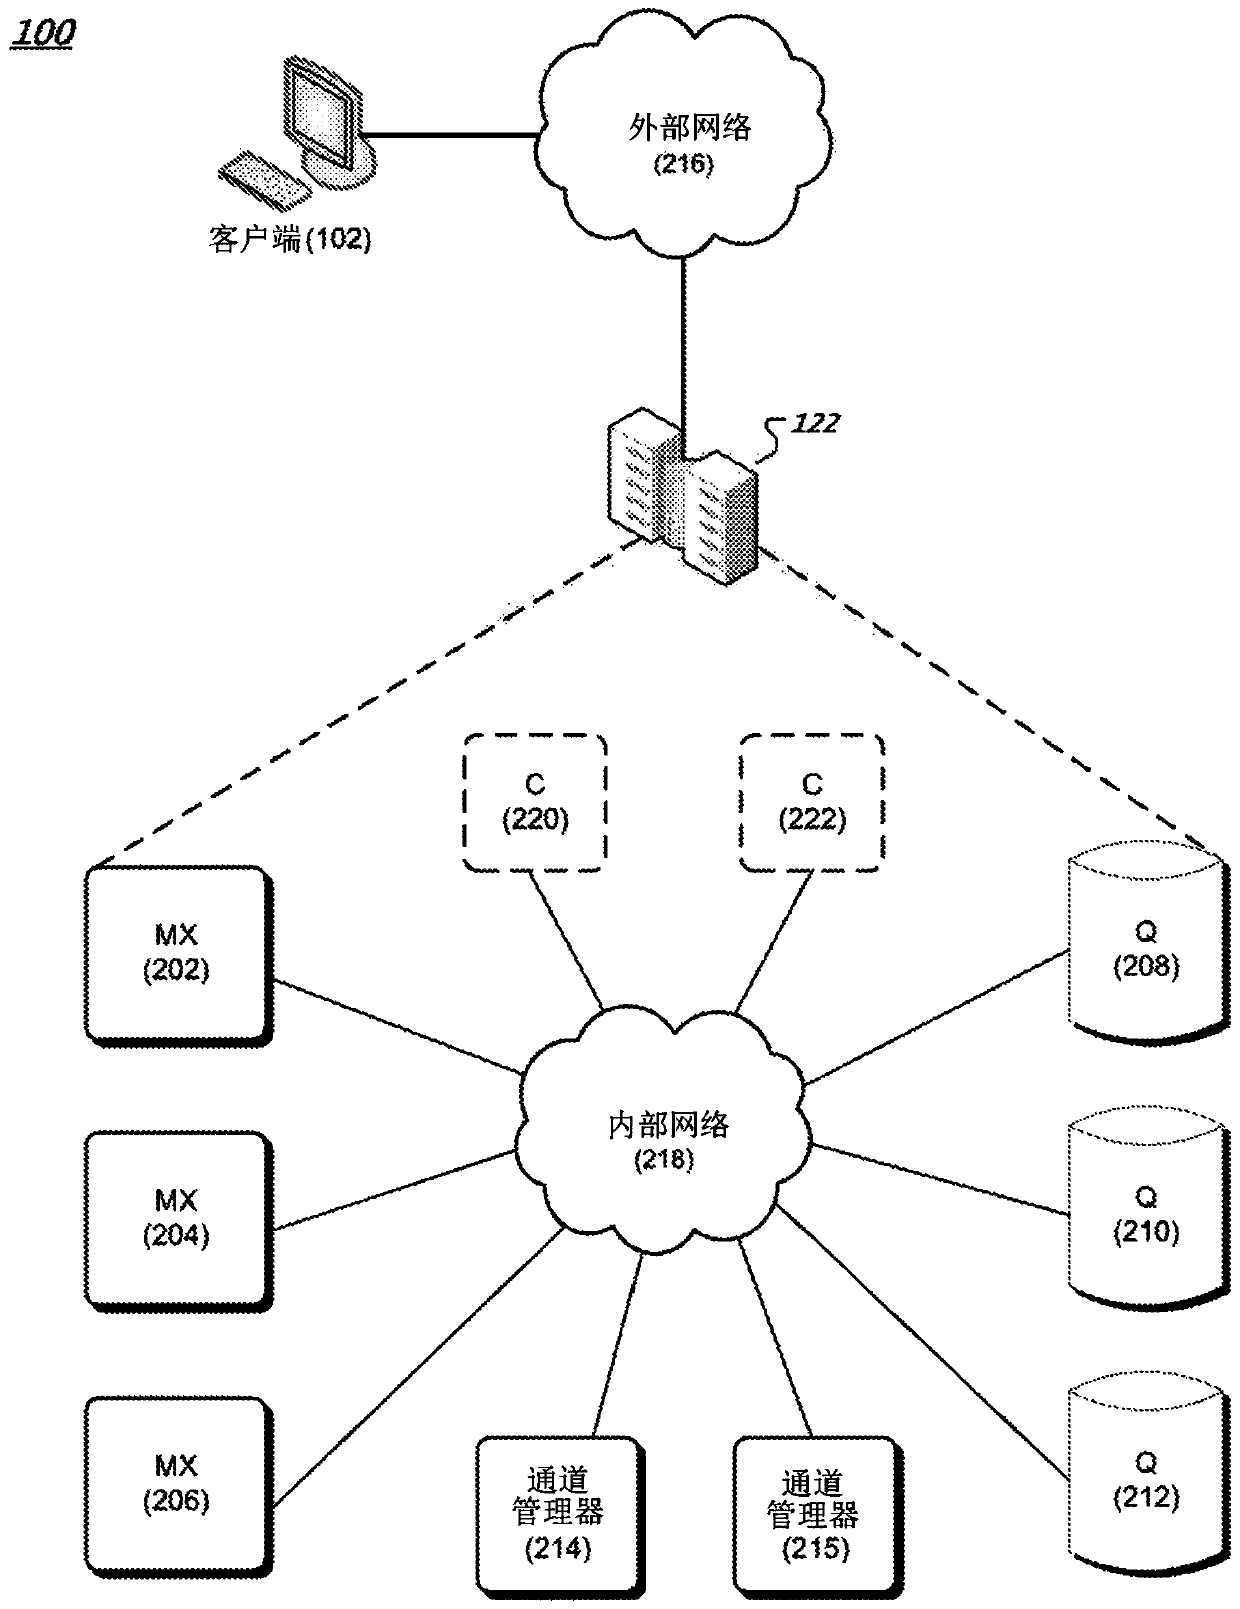 Access control for message channels in a messaging system